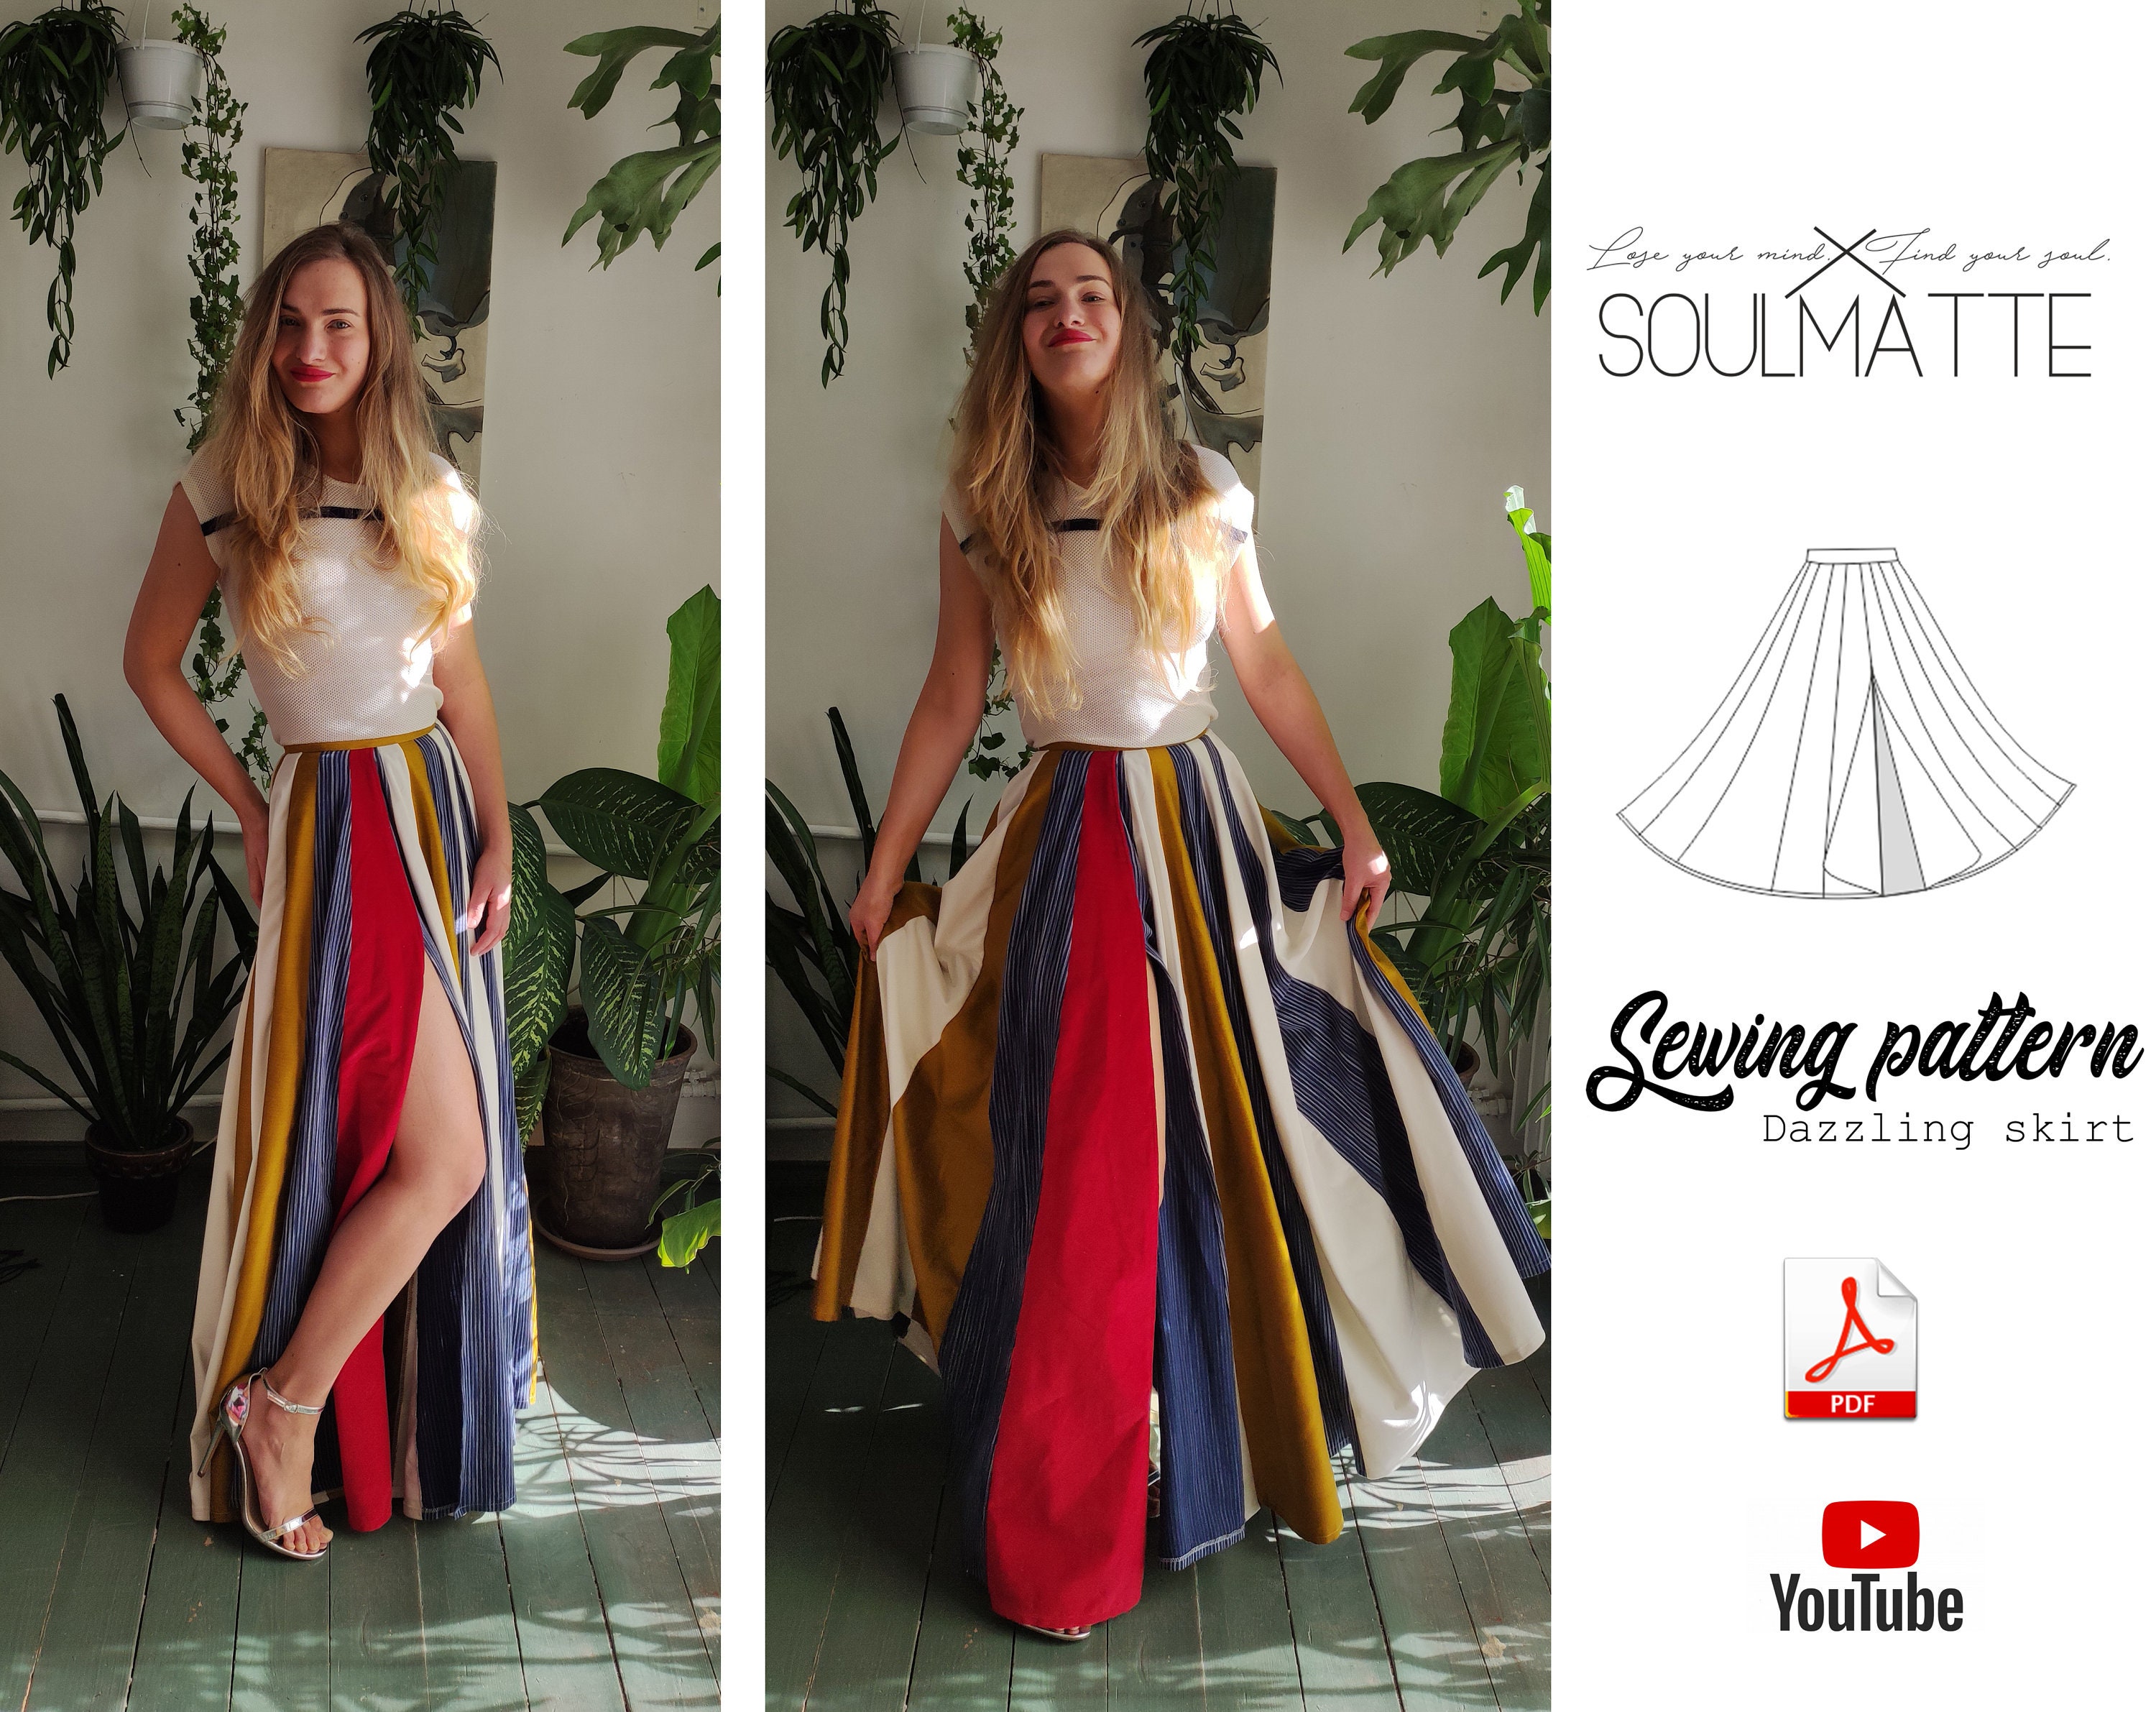 Easy Sewing Pattern for Women's Skirts, Maxi Skirt Pattern, Circle